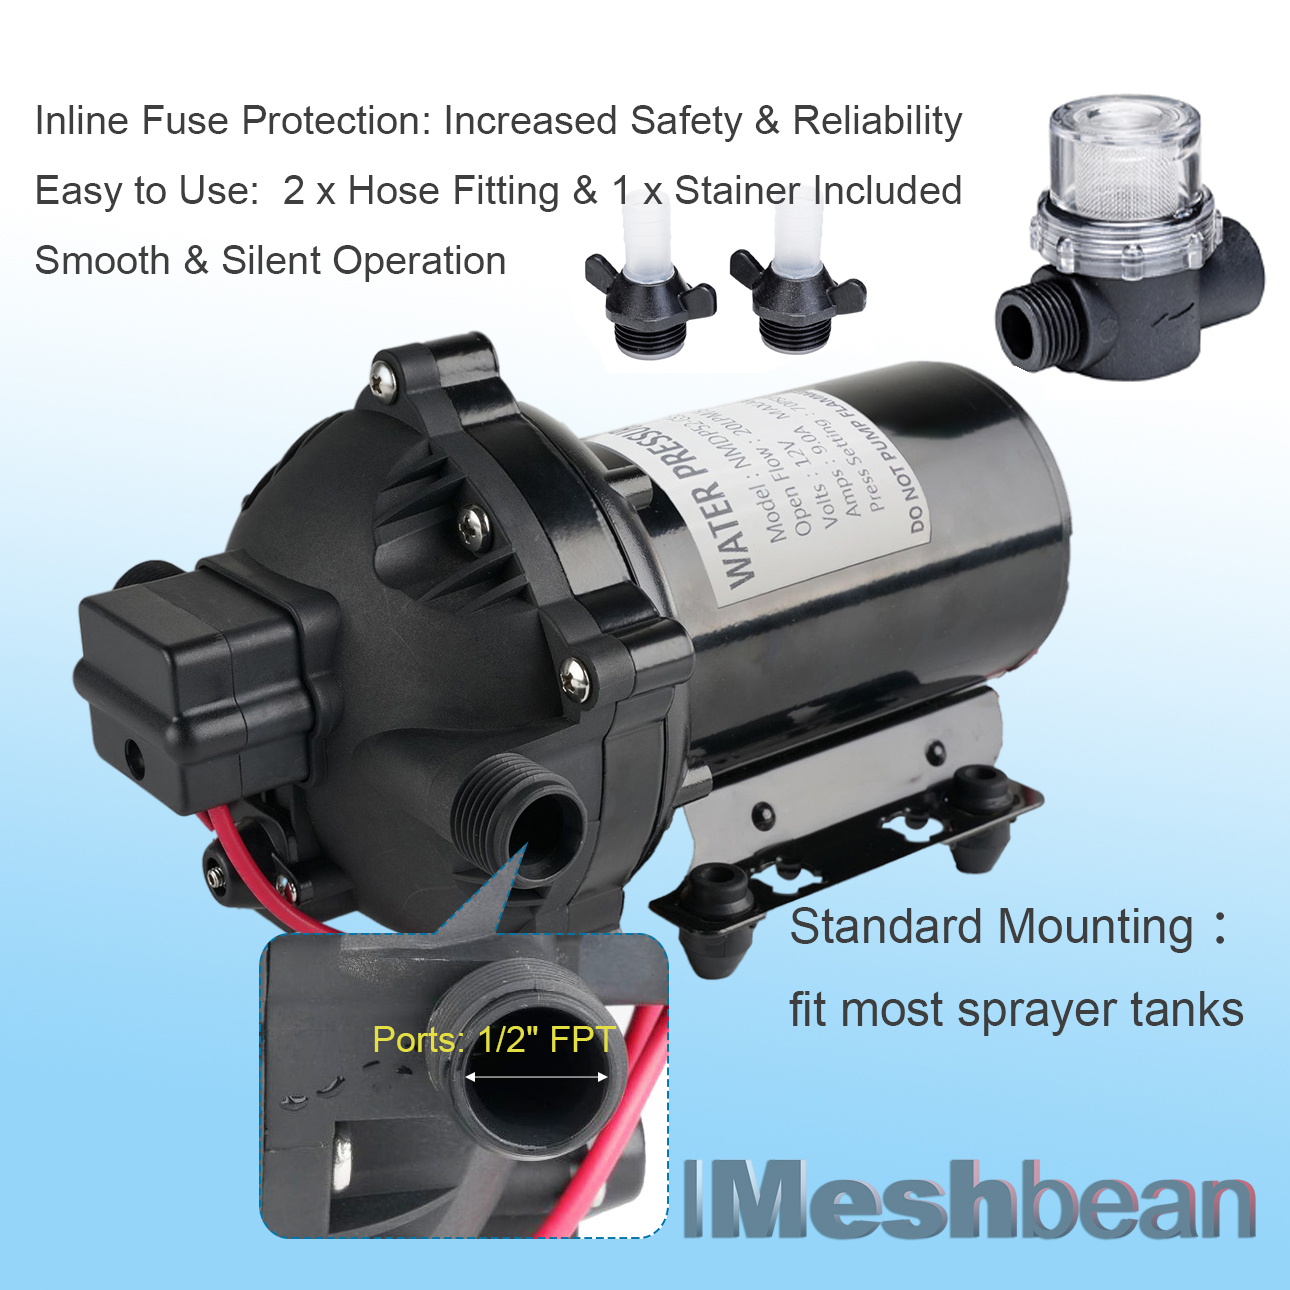 iMeshbean RV Water Pump 5.5 GPM 5.5 Gallons Per Minute 12V Water Pump Automatic 70 PSI Diaphragm Pump with 25 Foot Coiled Hose Washdown Pumps for Boats Caravan Rv Marine Yacht - image 4 of 7